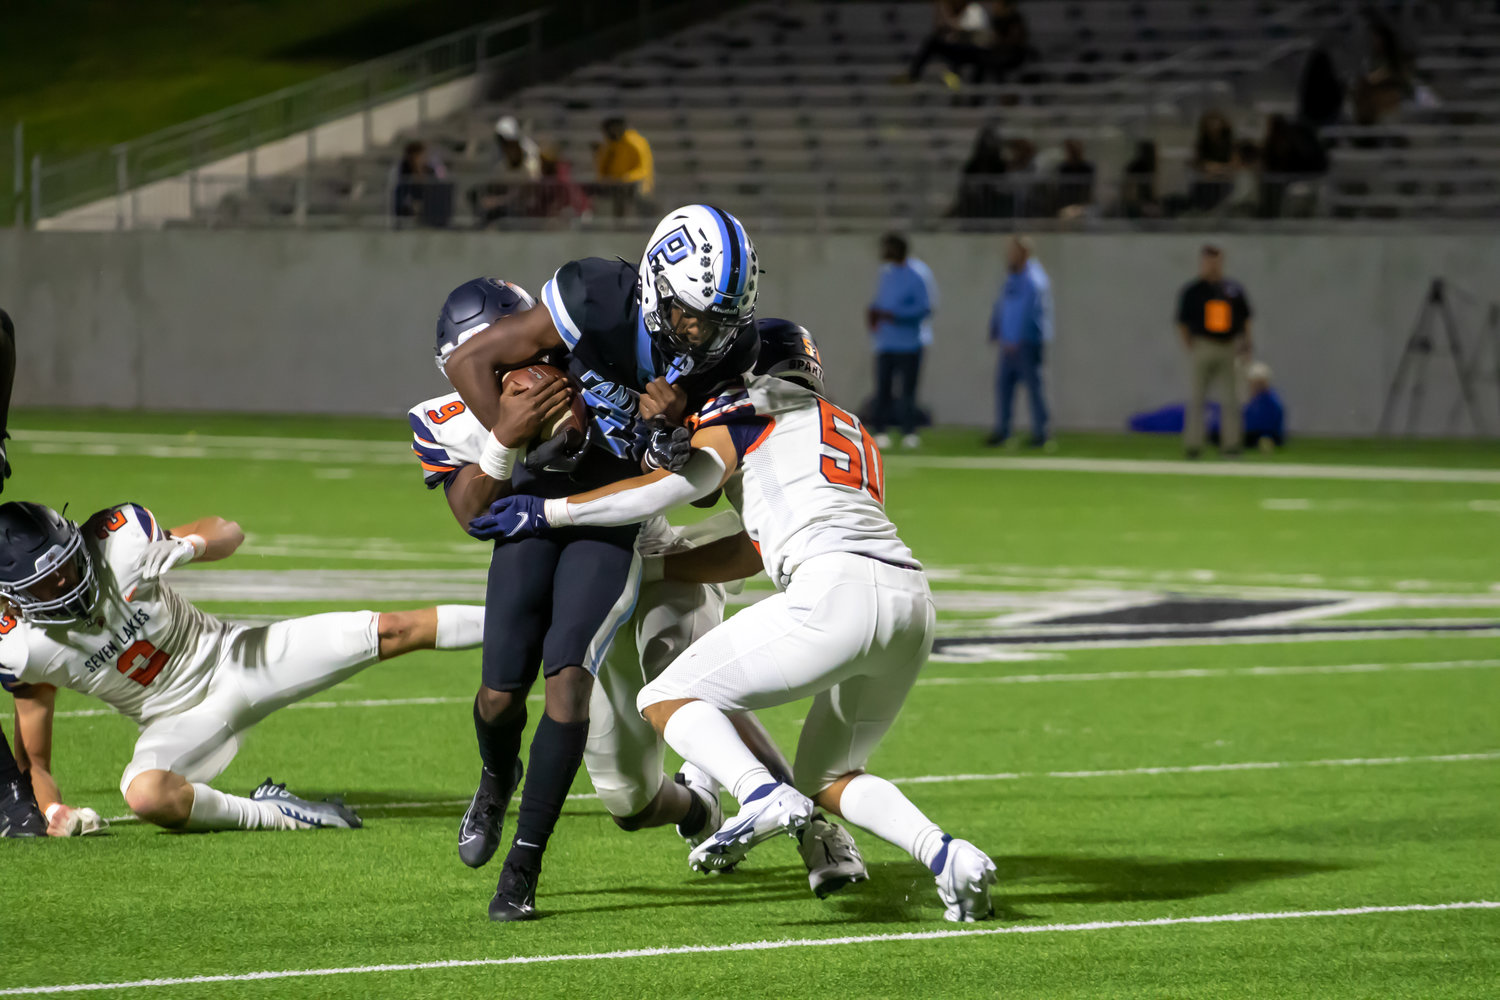 Paetow's Jamarious Bates fights through defenders during Thursday's game between Paetow and Seven Lakes at Legacy Stadium.